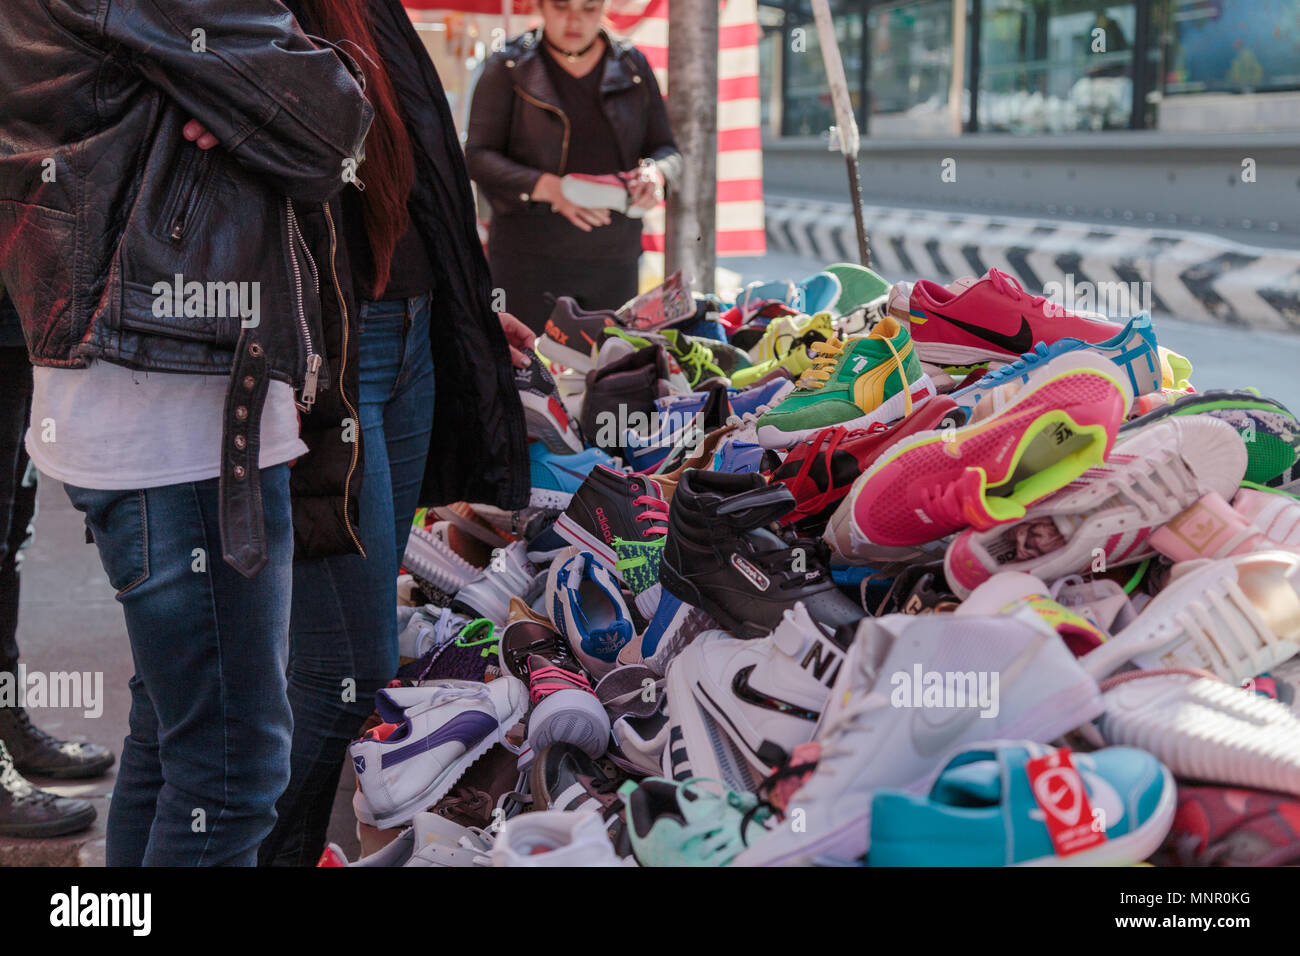 The potensial customers look at the randomly piled up shoes by the vender at Park Alameda Central,, Mexico City, Mexico. Stock Photo